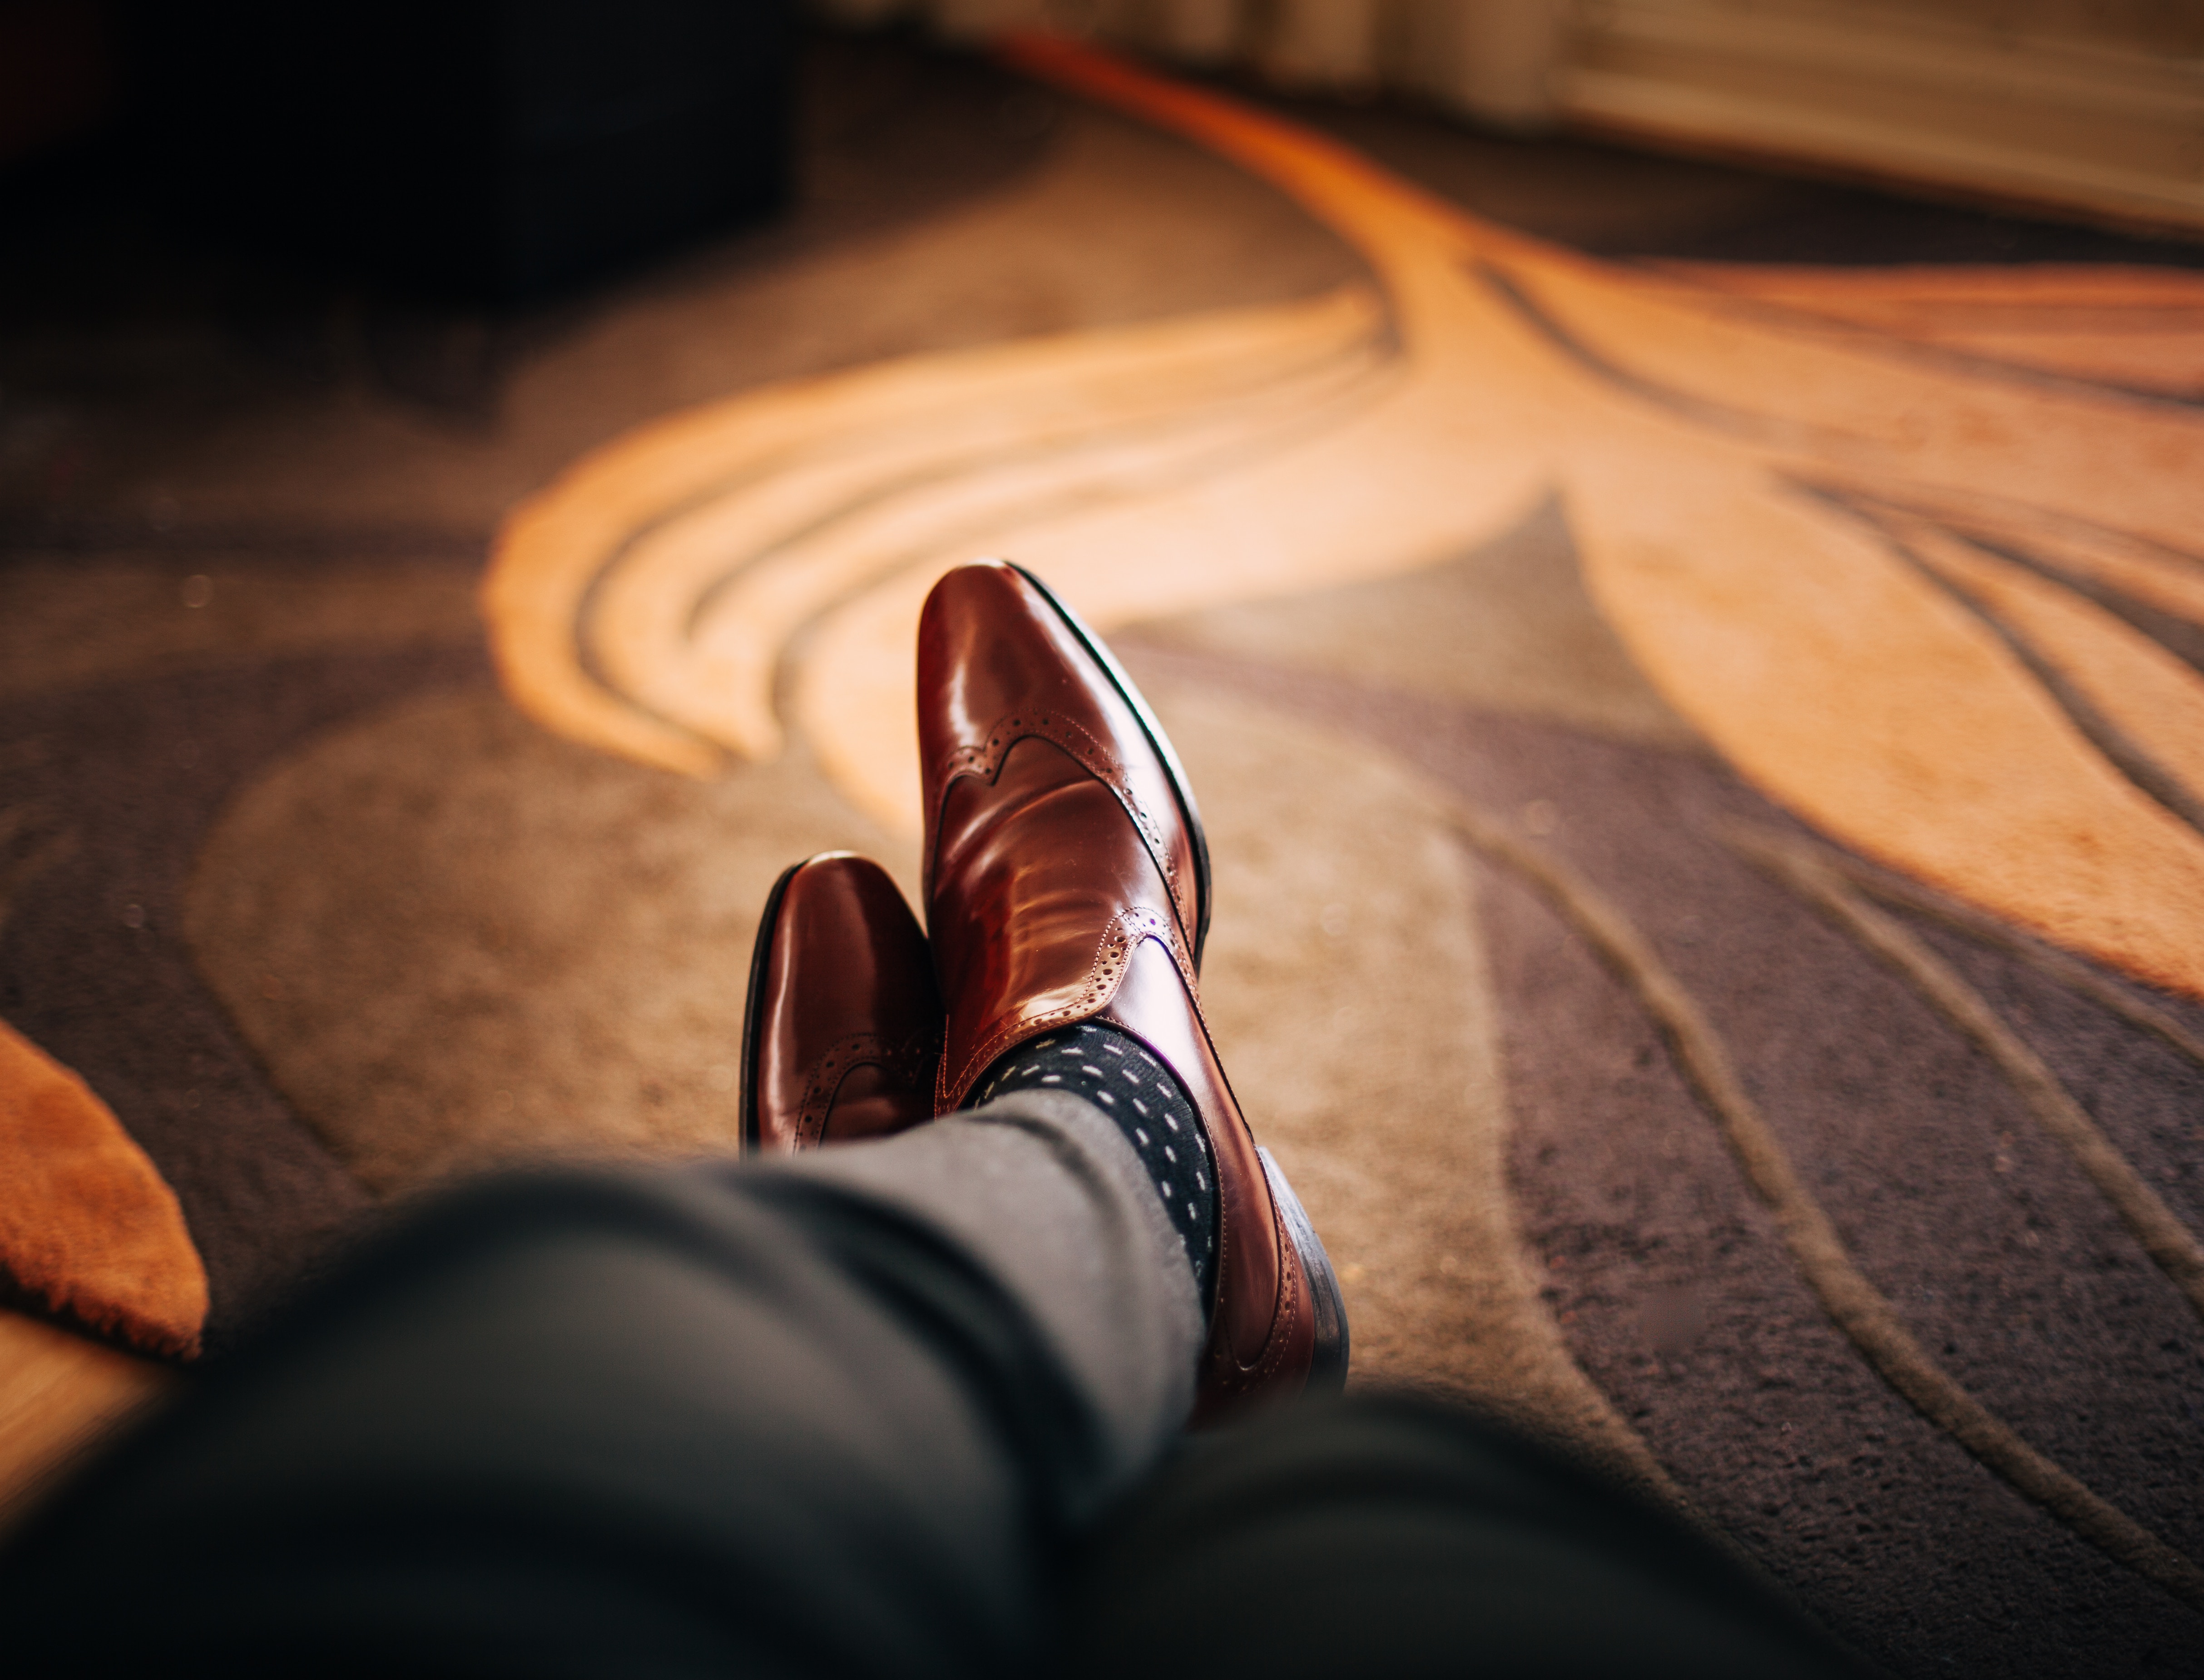 4853x3699 #carpet, #brougue, #sock, #fashion, #brown leather shoes, #sitting, #office shoes, #brown, #Free , #leather, #male, #office, #feet, #leg, #legs crossed, #living, #man, #rug, #shoes, #shoe, #carpet floor